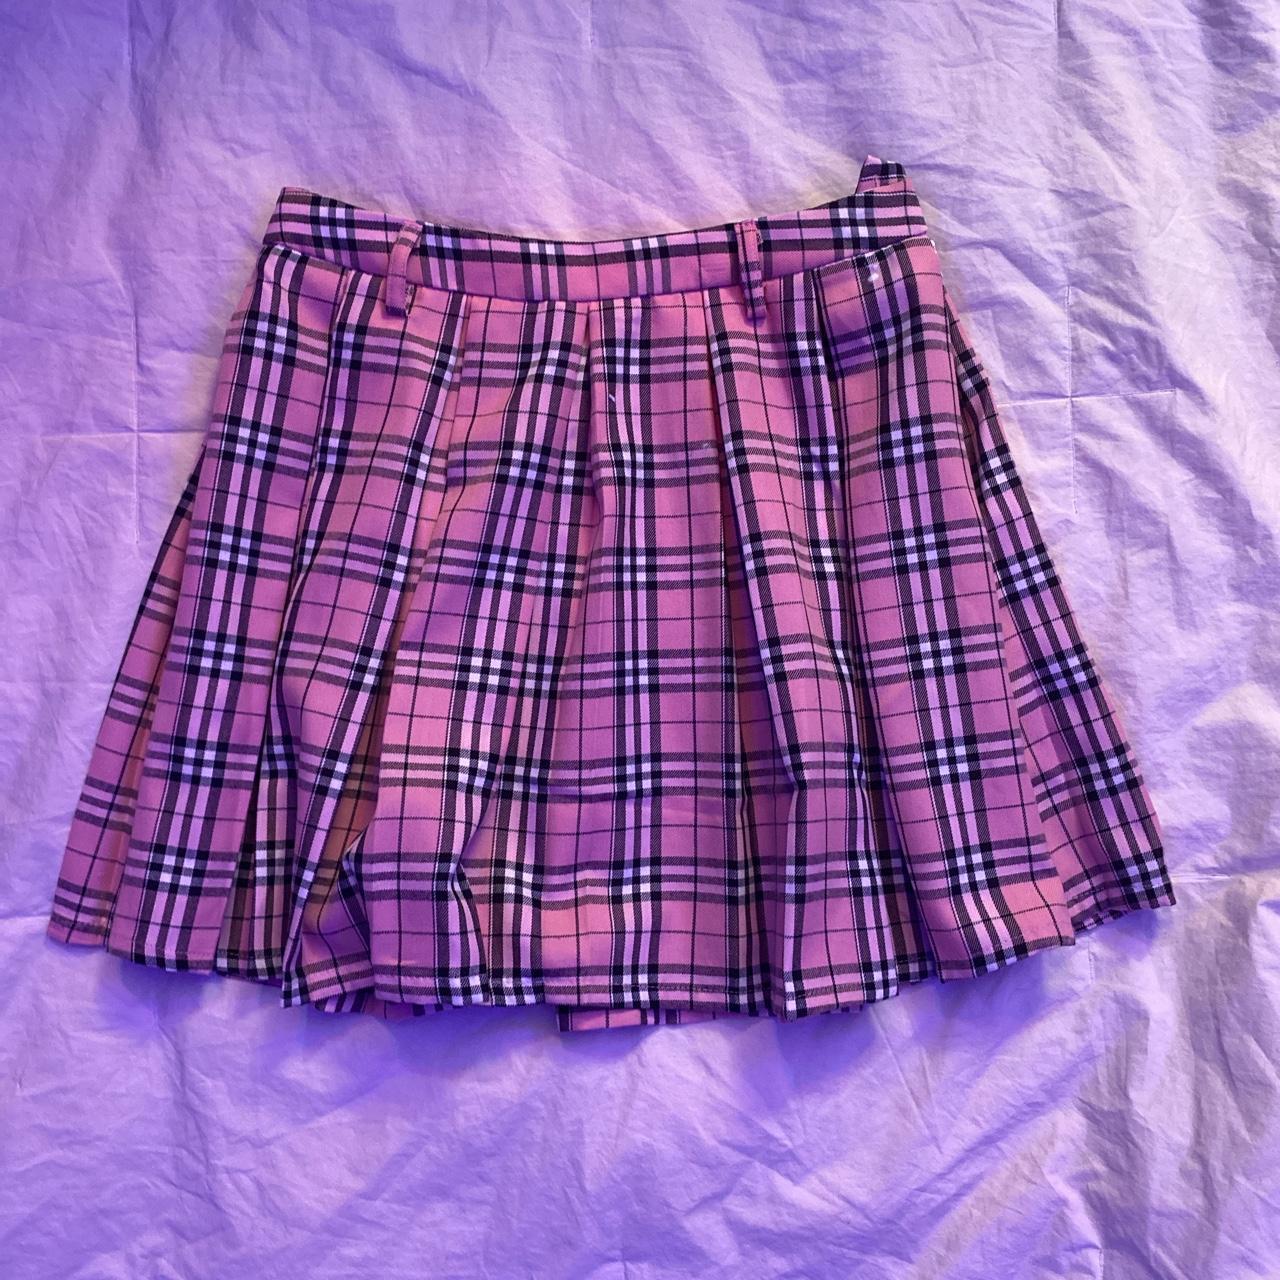 Pink and black plaid hot topic skirt size small -... - Depop